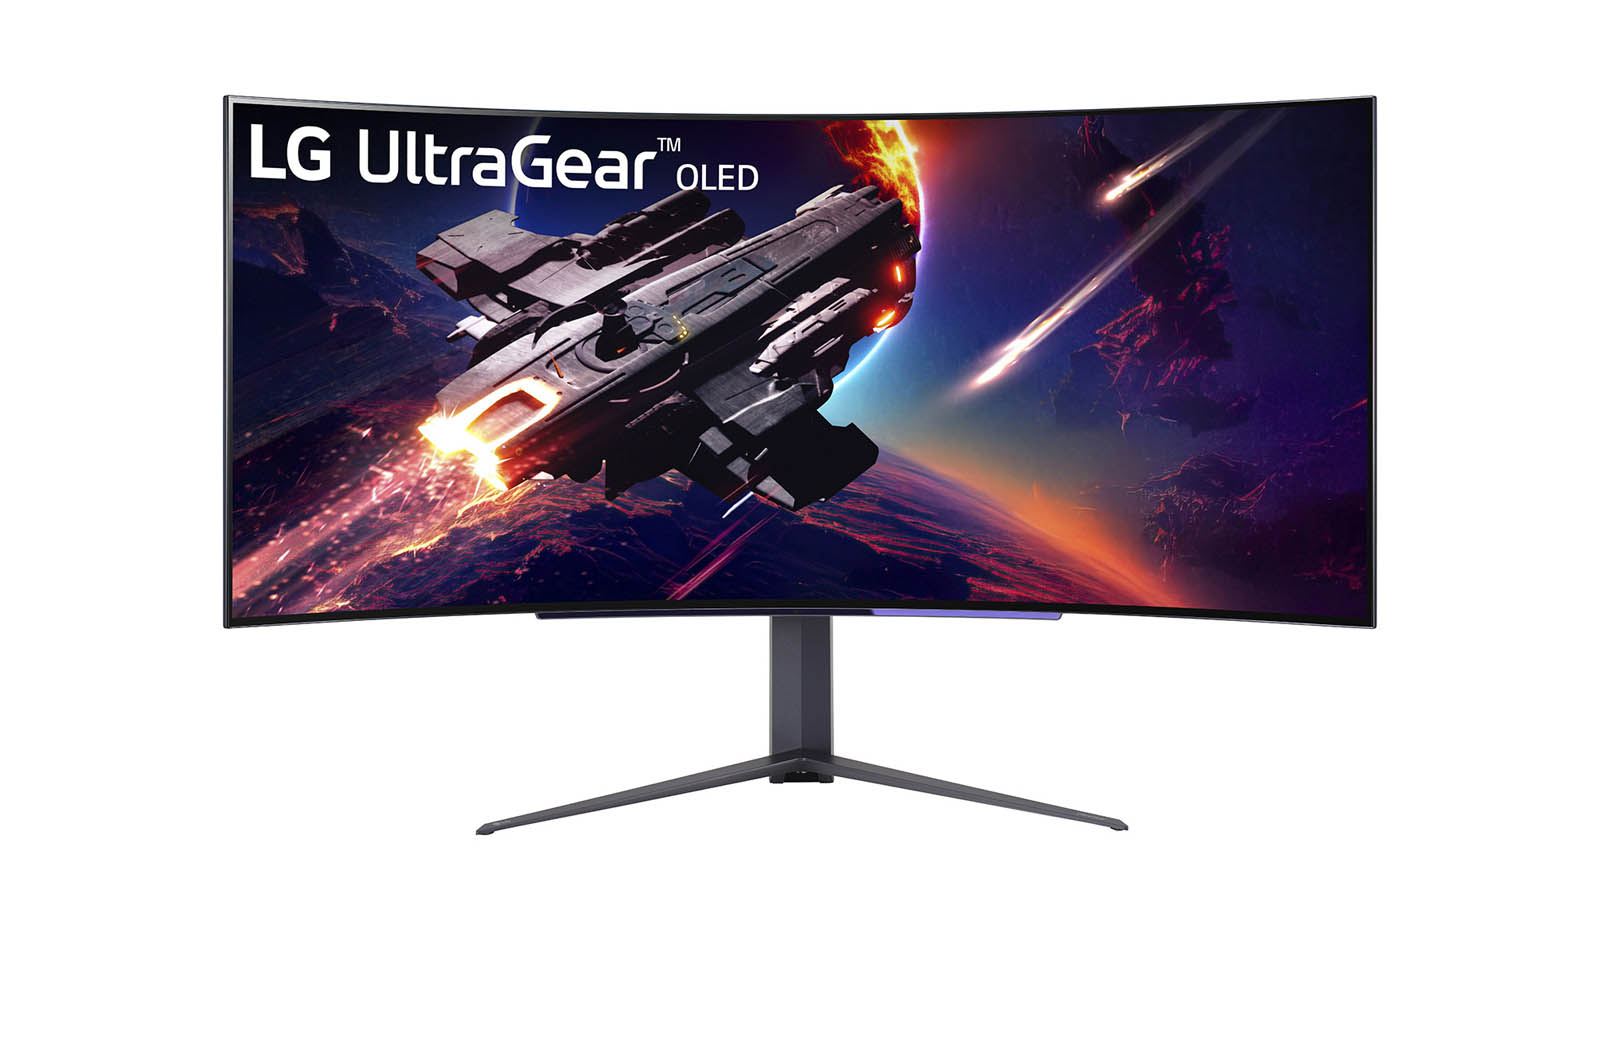 LG 45” UltraGear™ 21:9 WQHD Curved OLED Gaming Monitor with 240Hz Refresh Rate, 45GR95QE-B